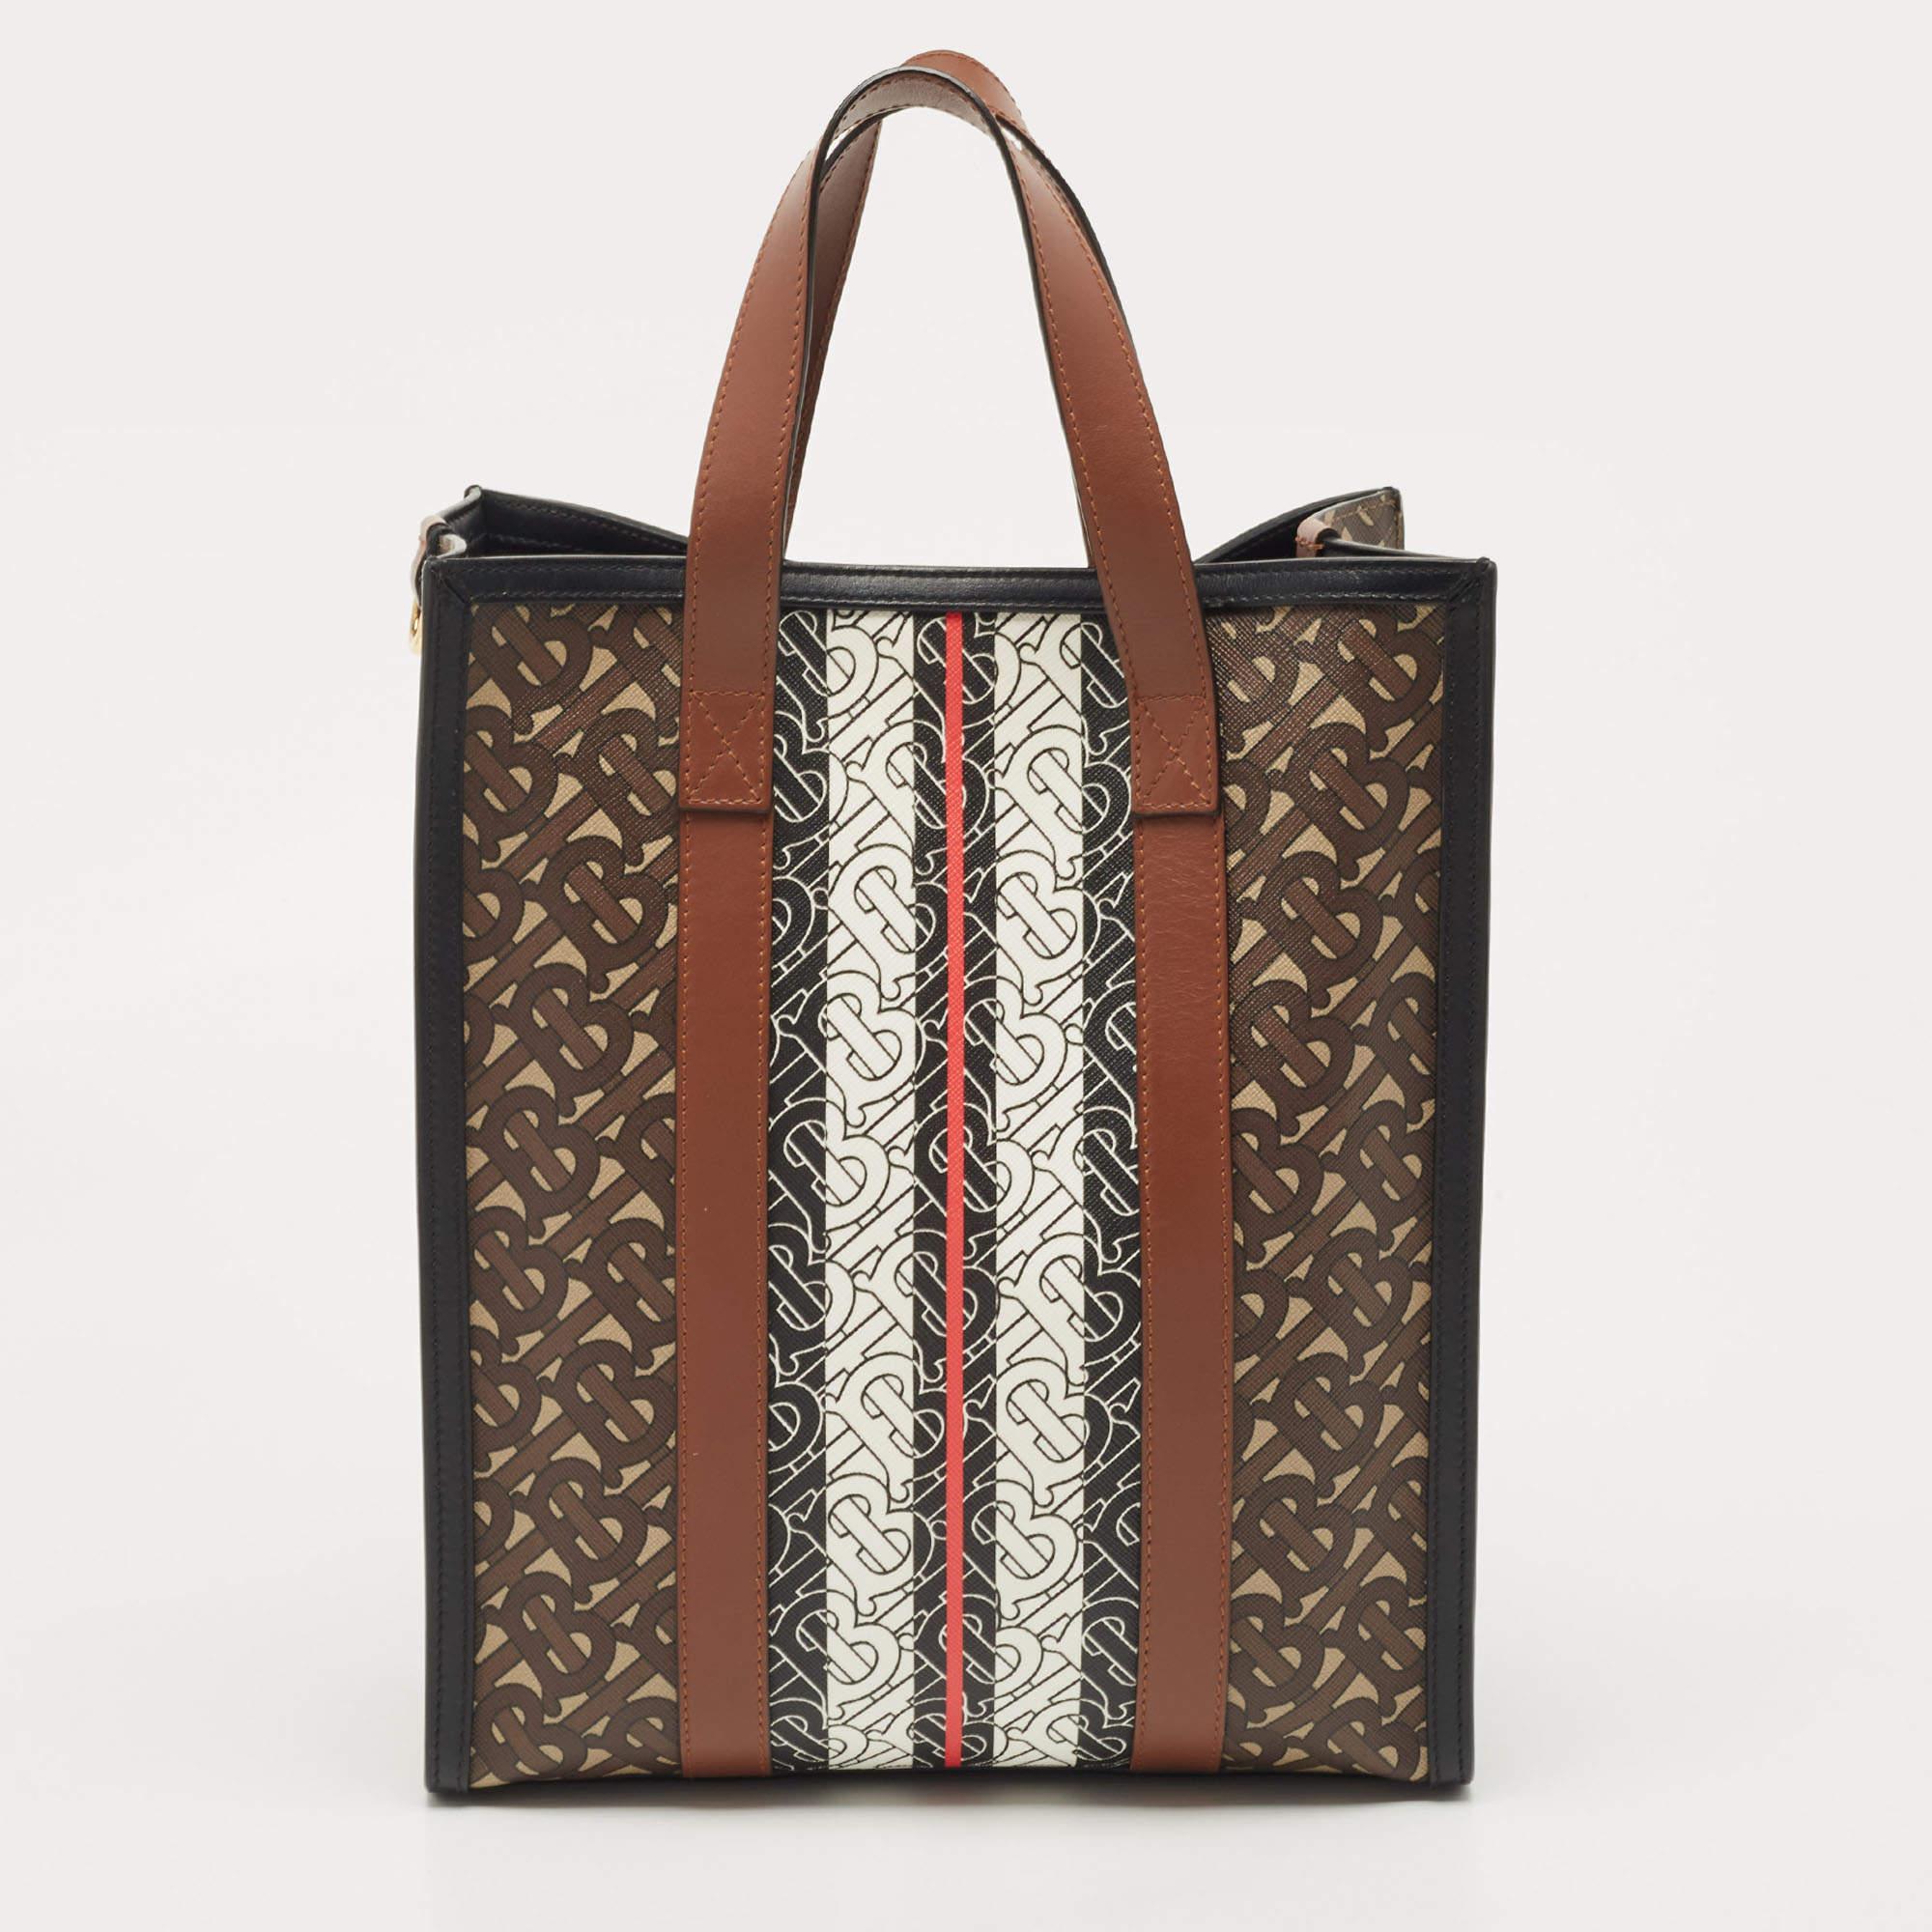 Be it your daily commute to work, shopping sprees, and vacations, a tote bag will never fail you. This designer creation is made to last and assist you in your fashion-filled days.

Includes: Original Dustbag, Detachable Strap
